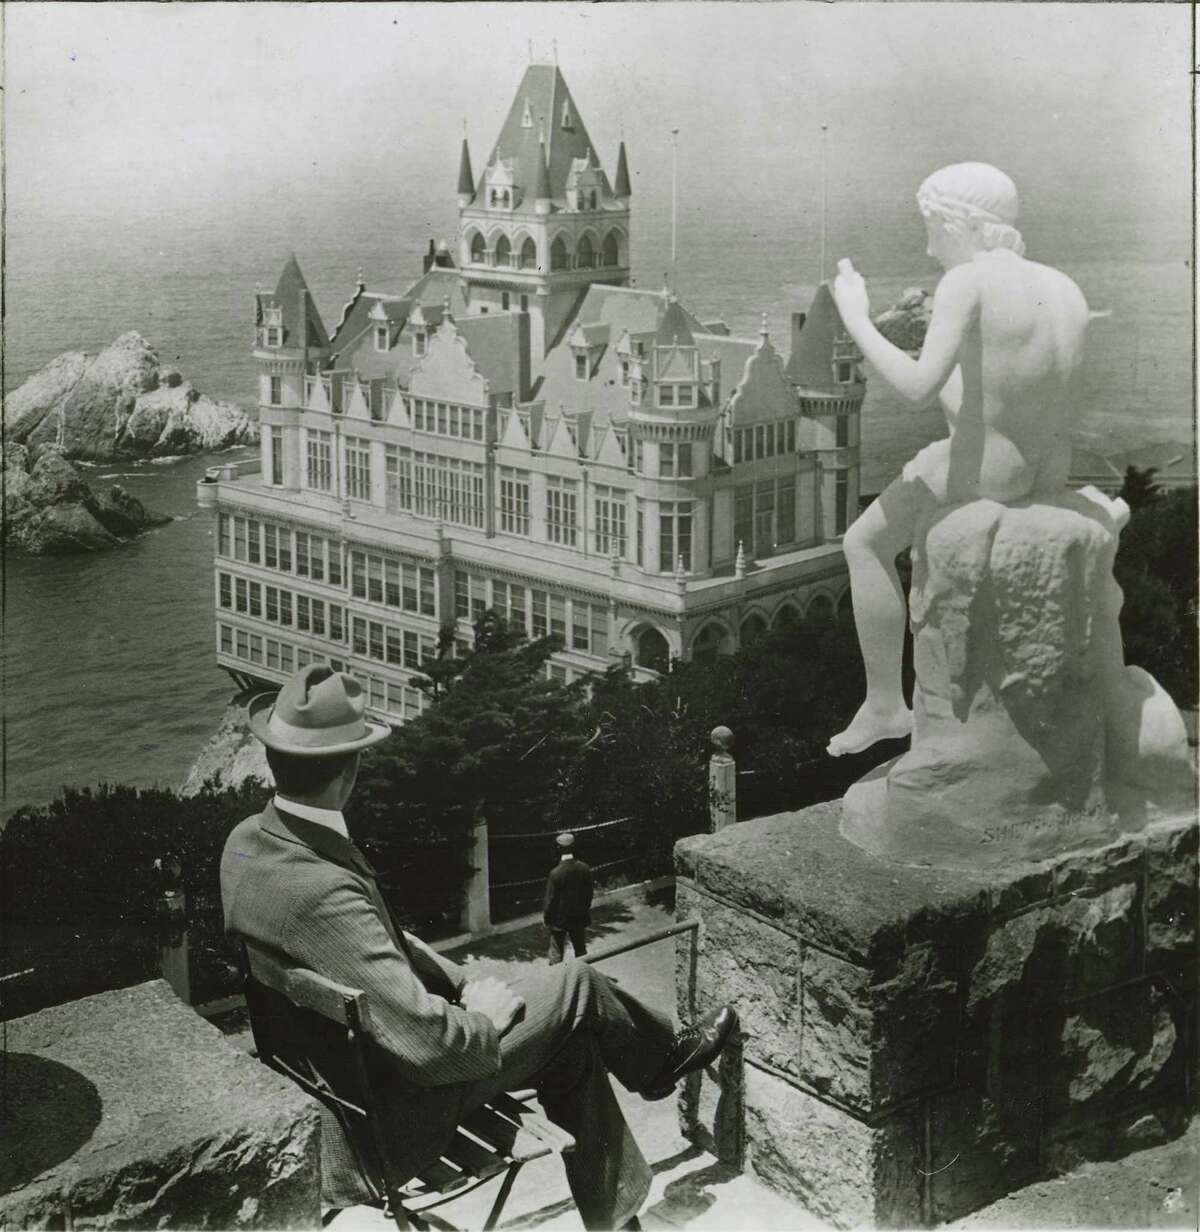 In 1896, Adolph Sutro, then the owner, built a new Cliff House modeled on a French chateau. The grandiose building boasted a 200-foot tower topped by an observation deck.